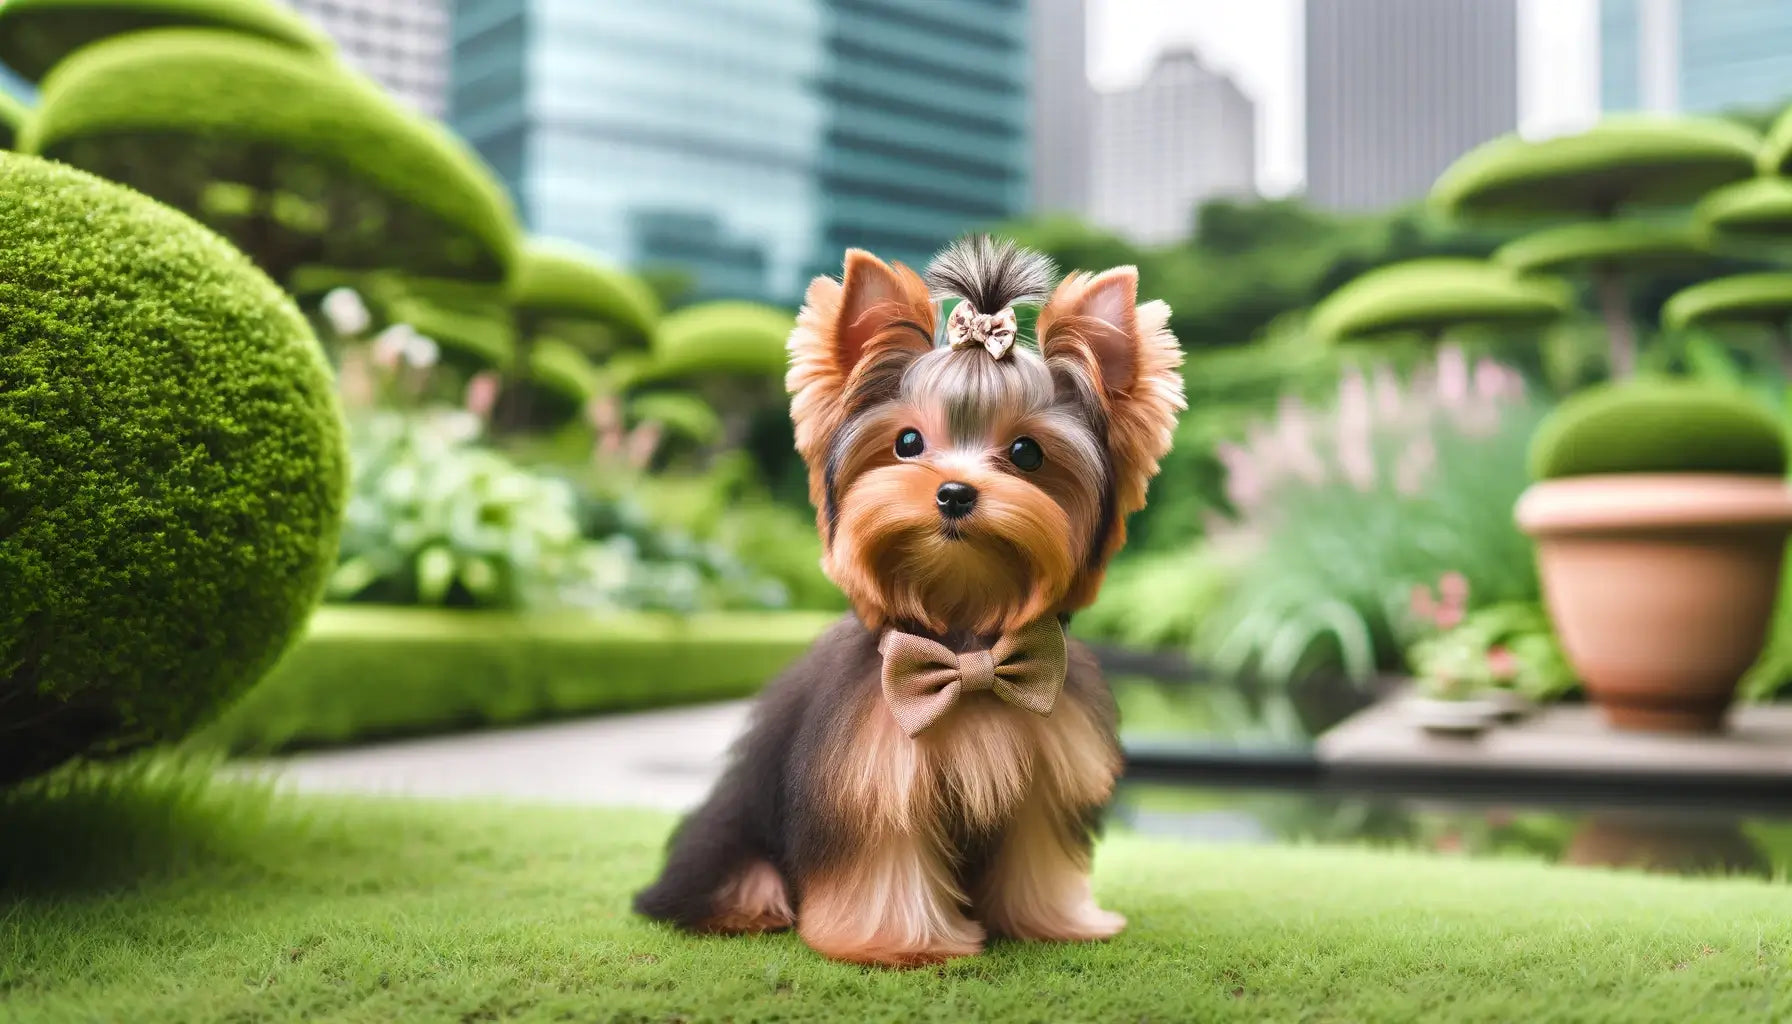 A Teacup Yorkie with a smart bow on its head.